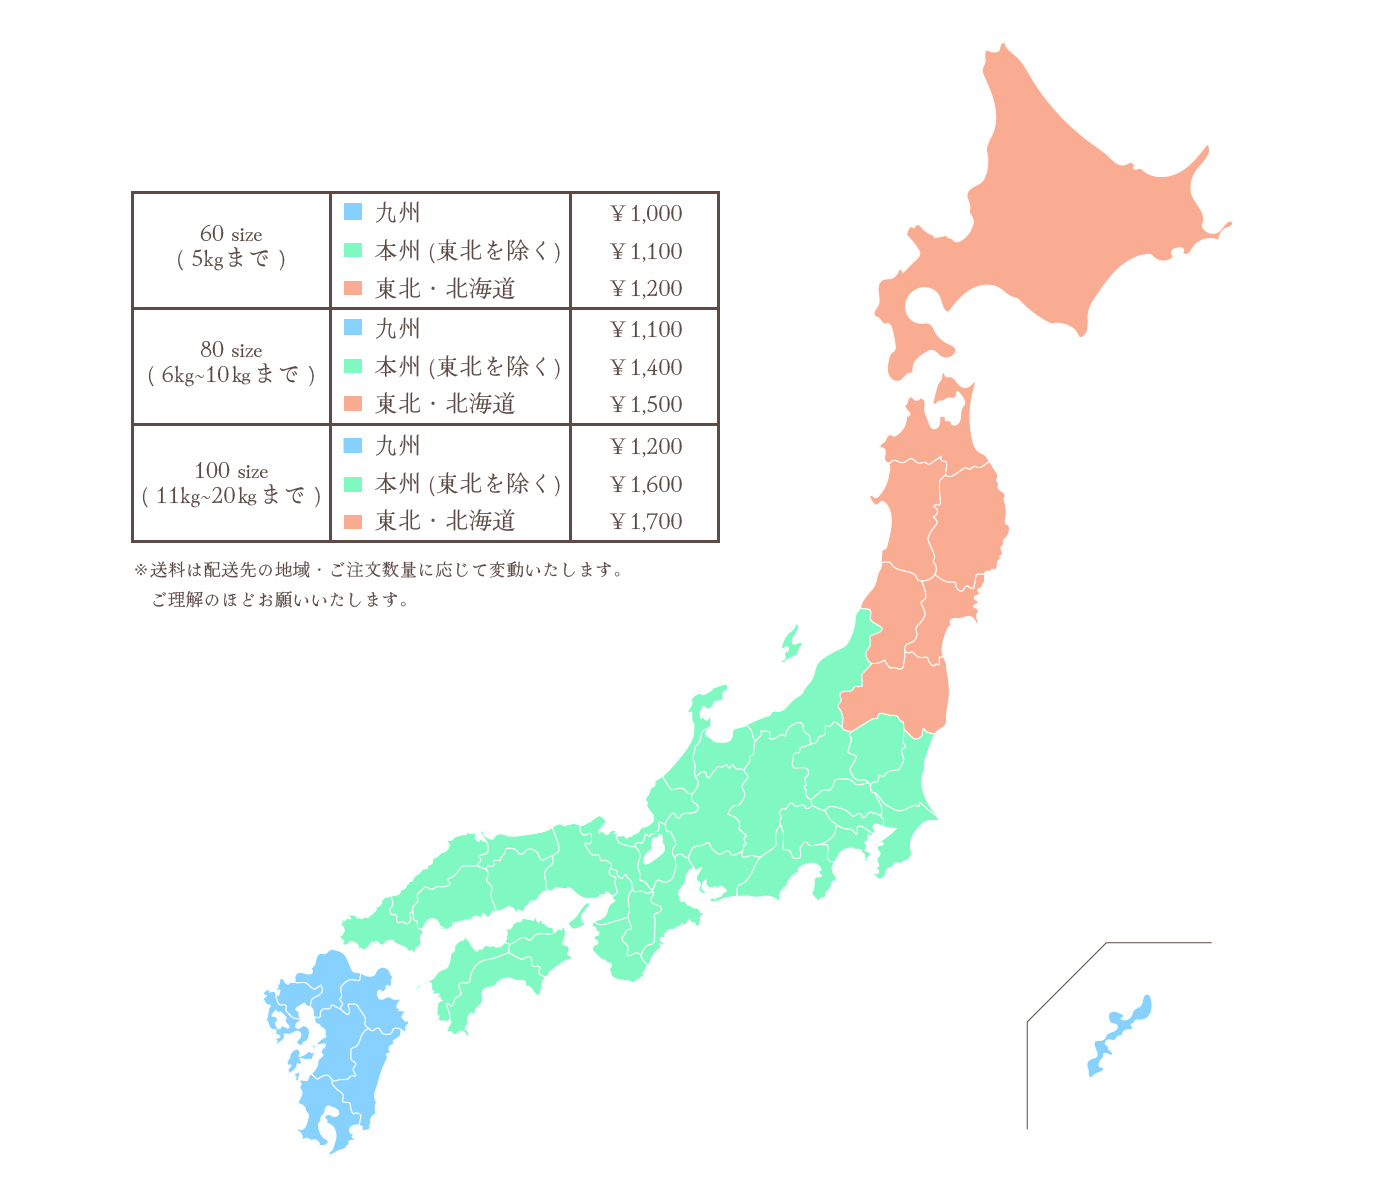 map of Japan - rates by region